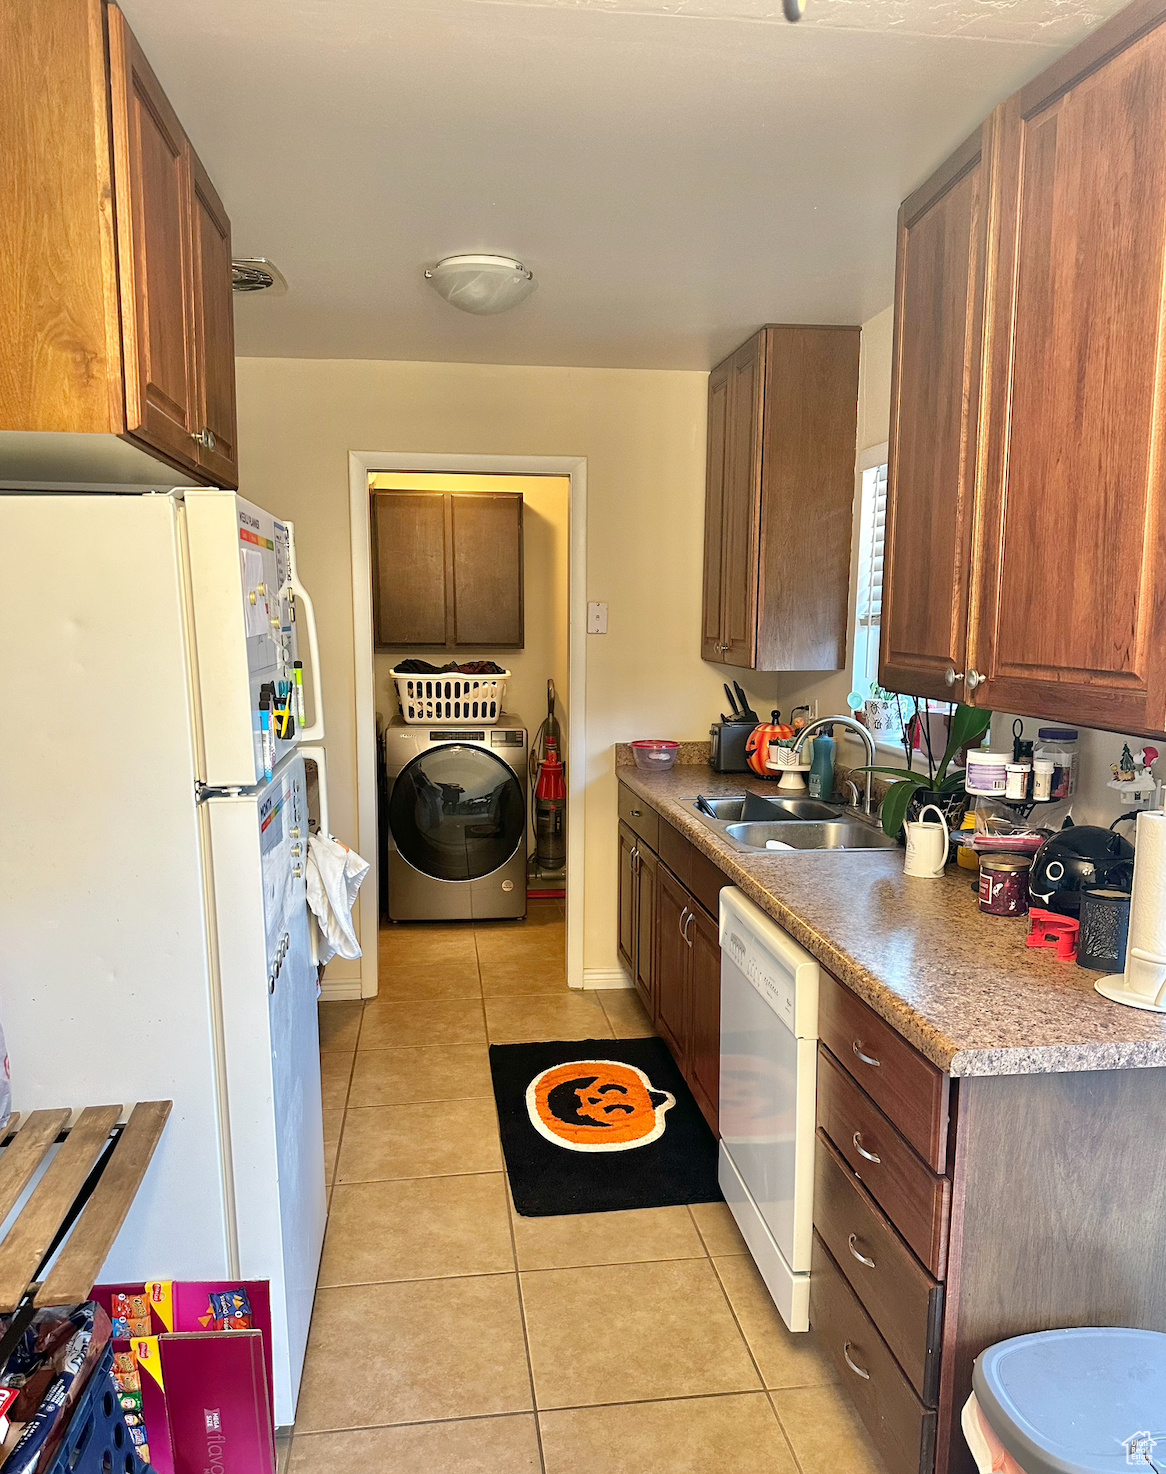 Kitchen featuring washer / dryer, white appliances, light tile floors, and sink